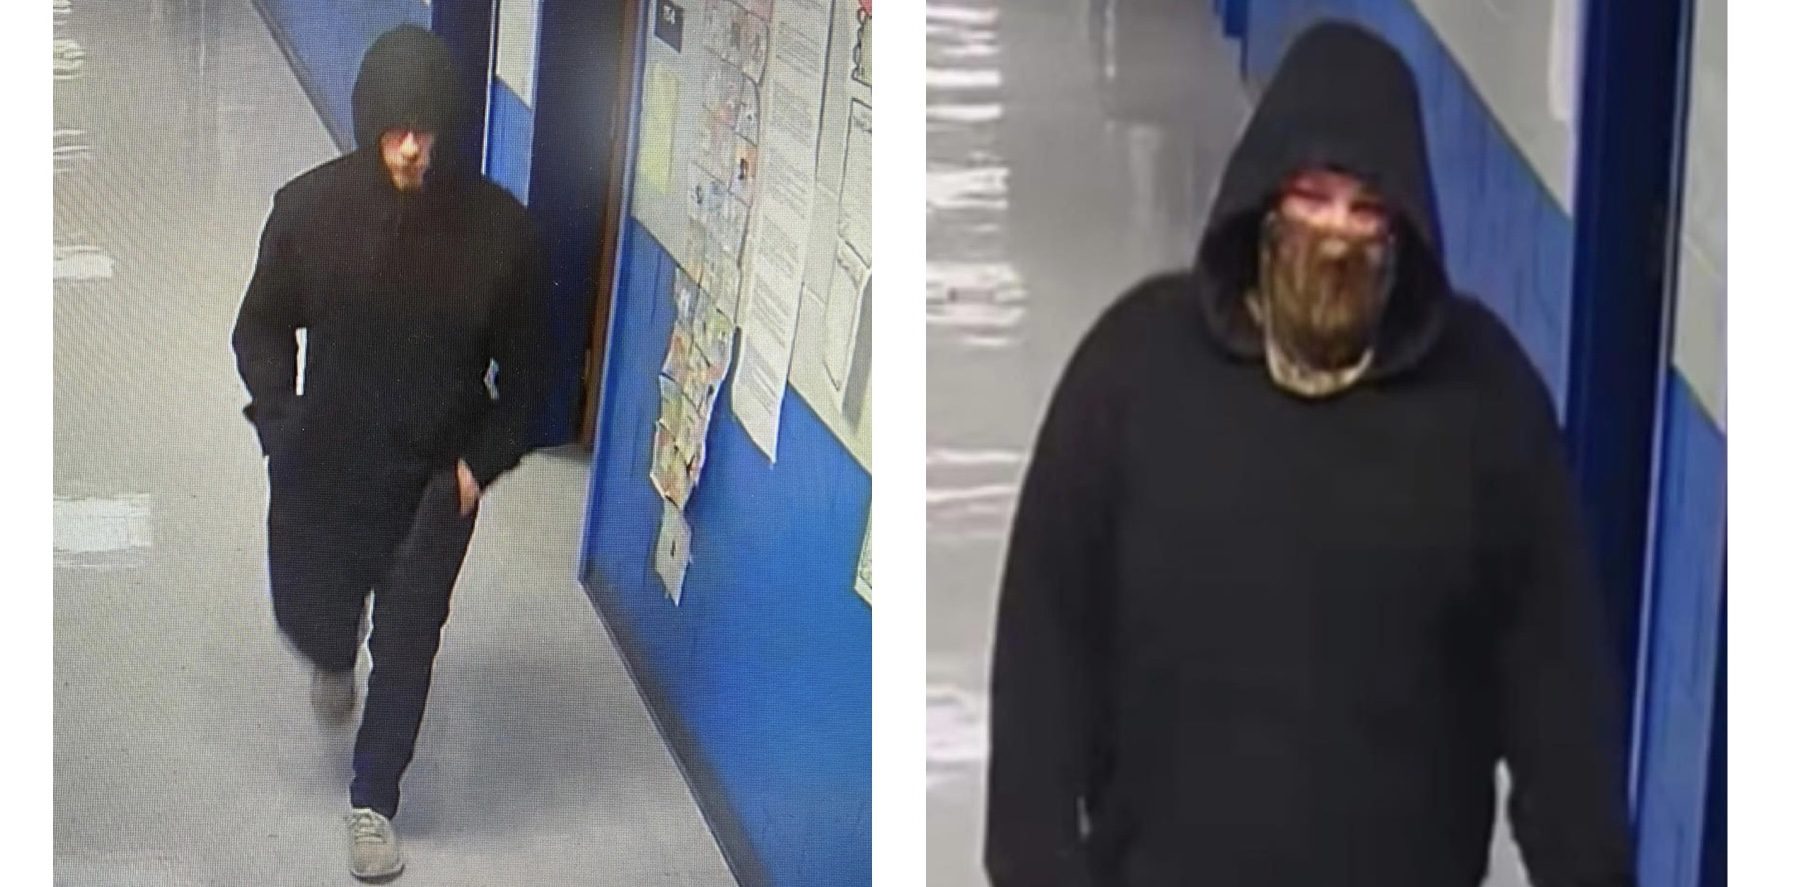 Police for individuals who broke into local school and stole cash